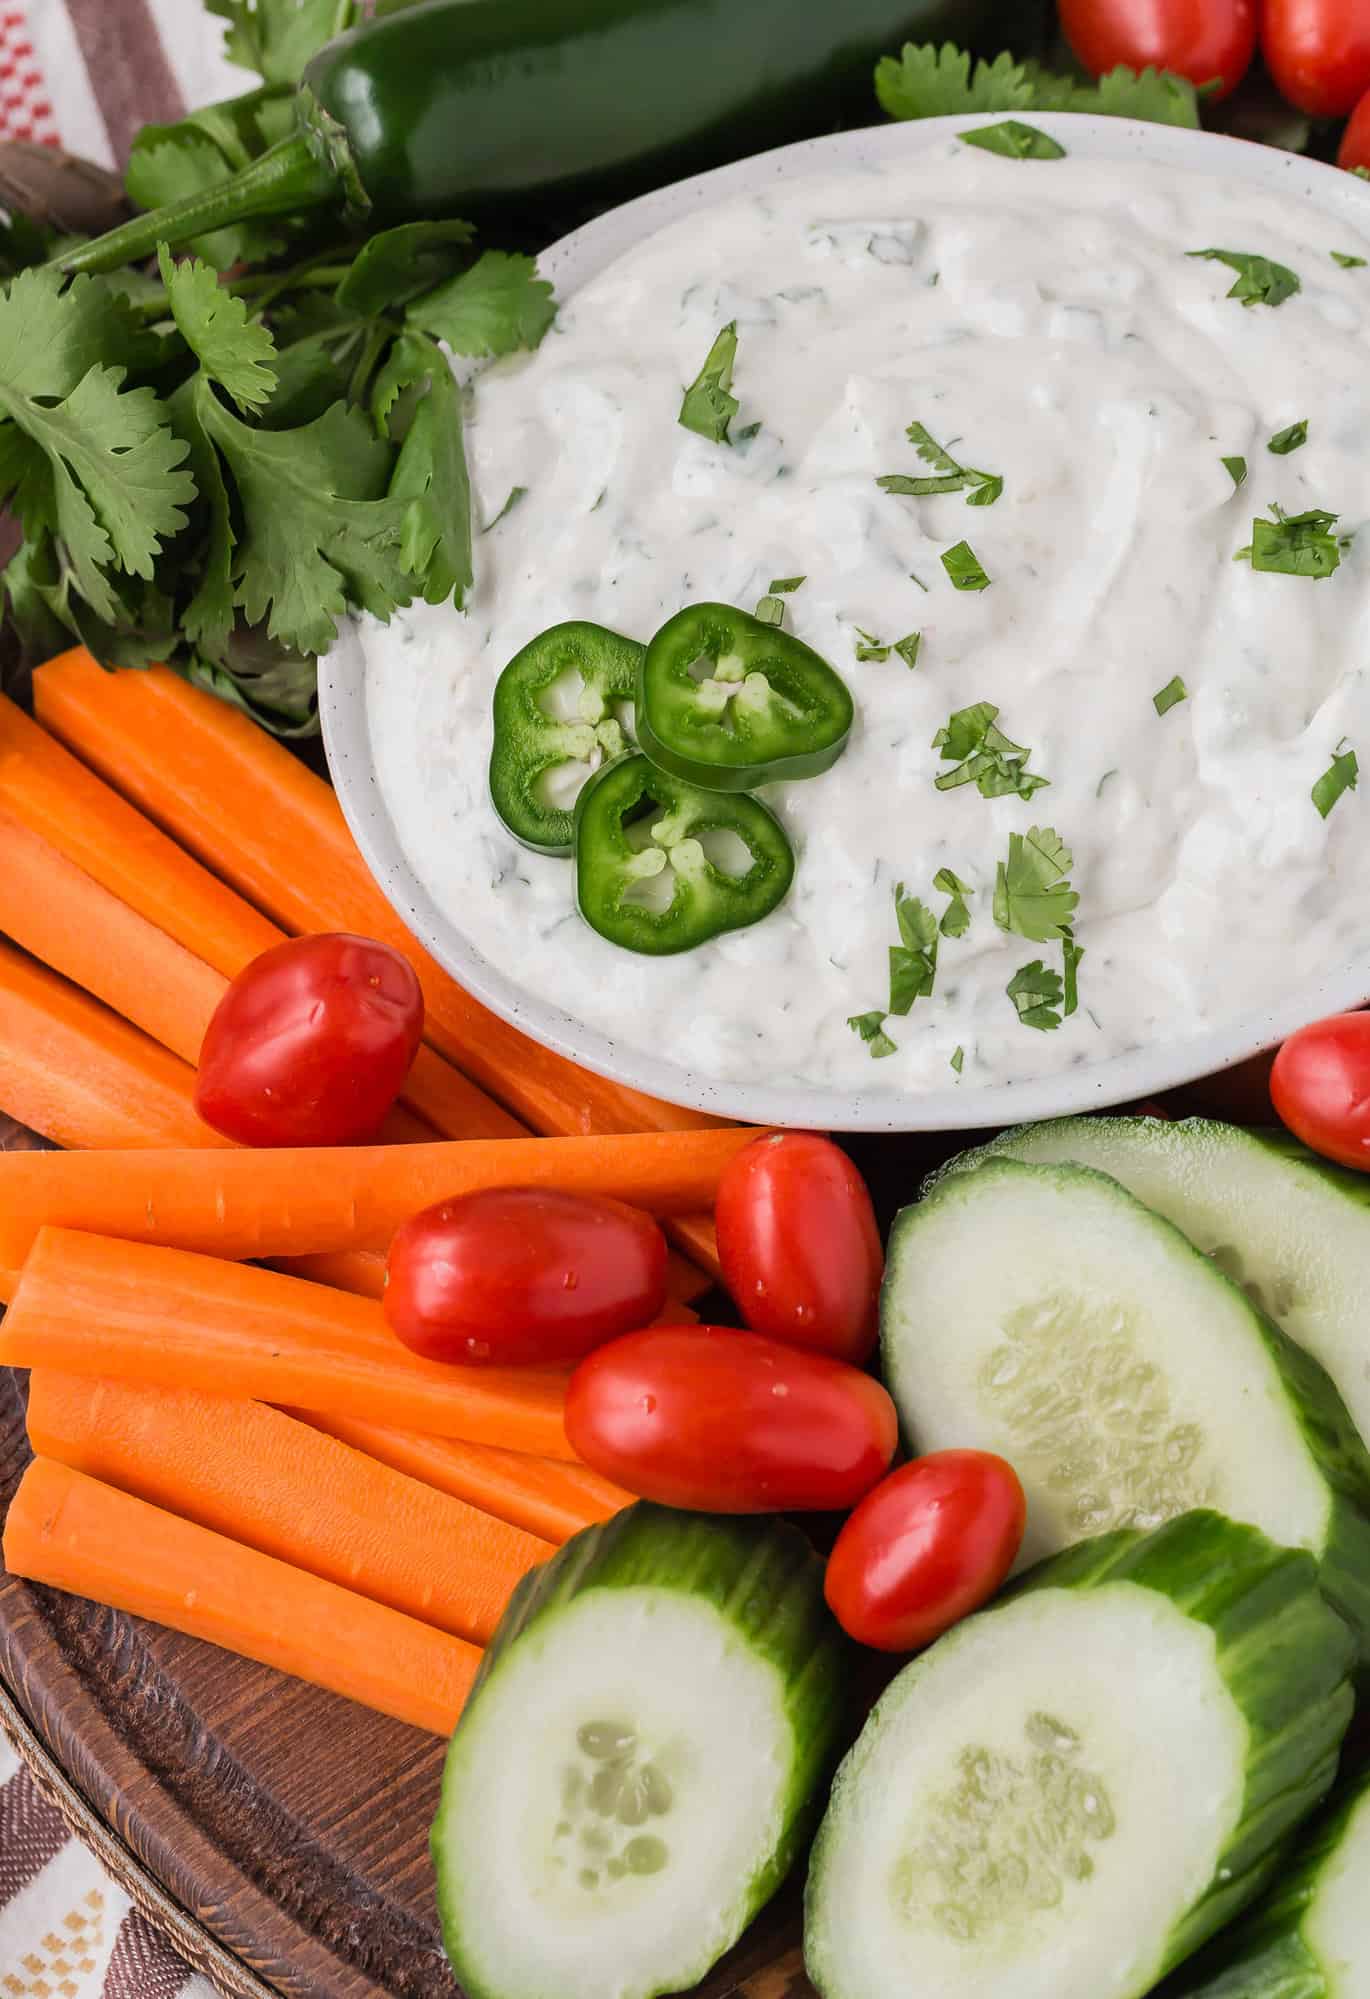 Ranch dip topped with jalapeno, surrounded by vegetables.